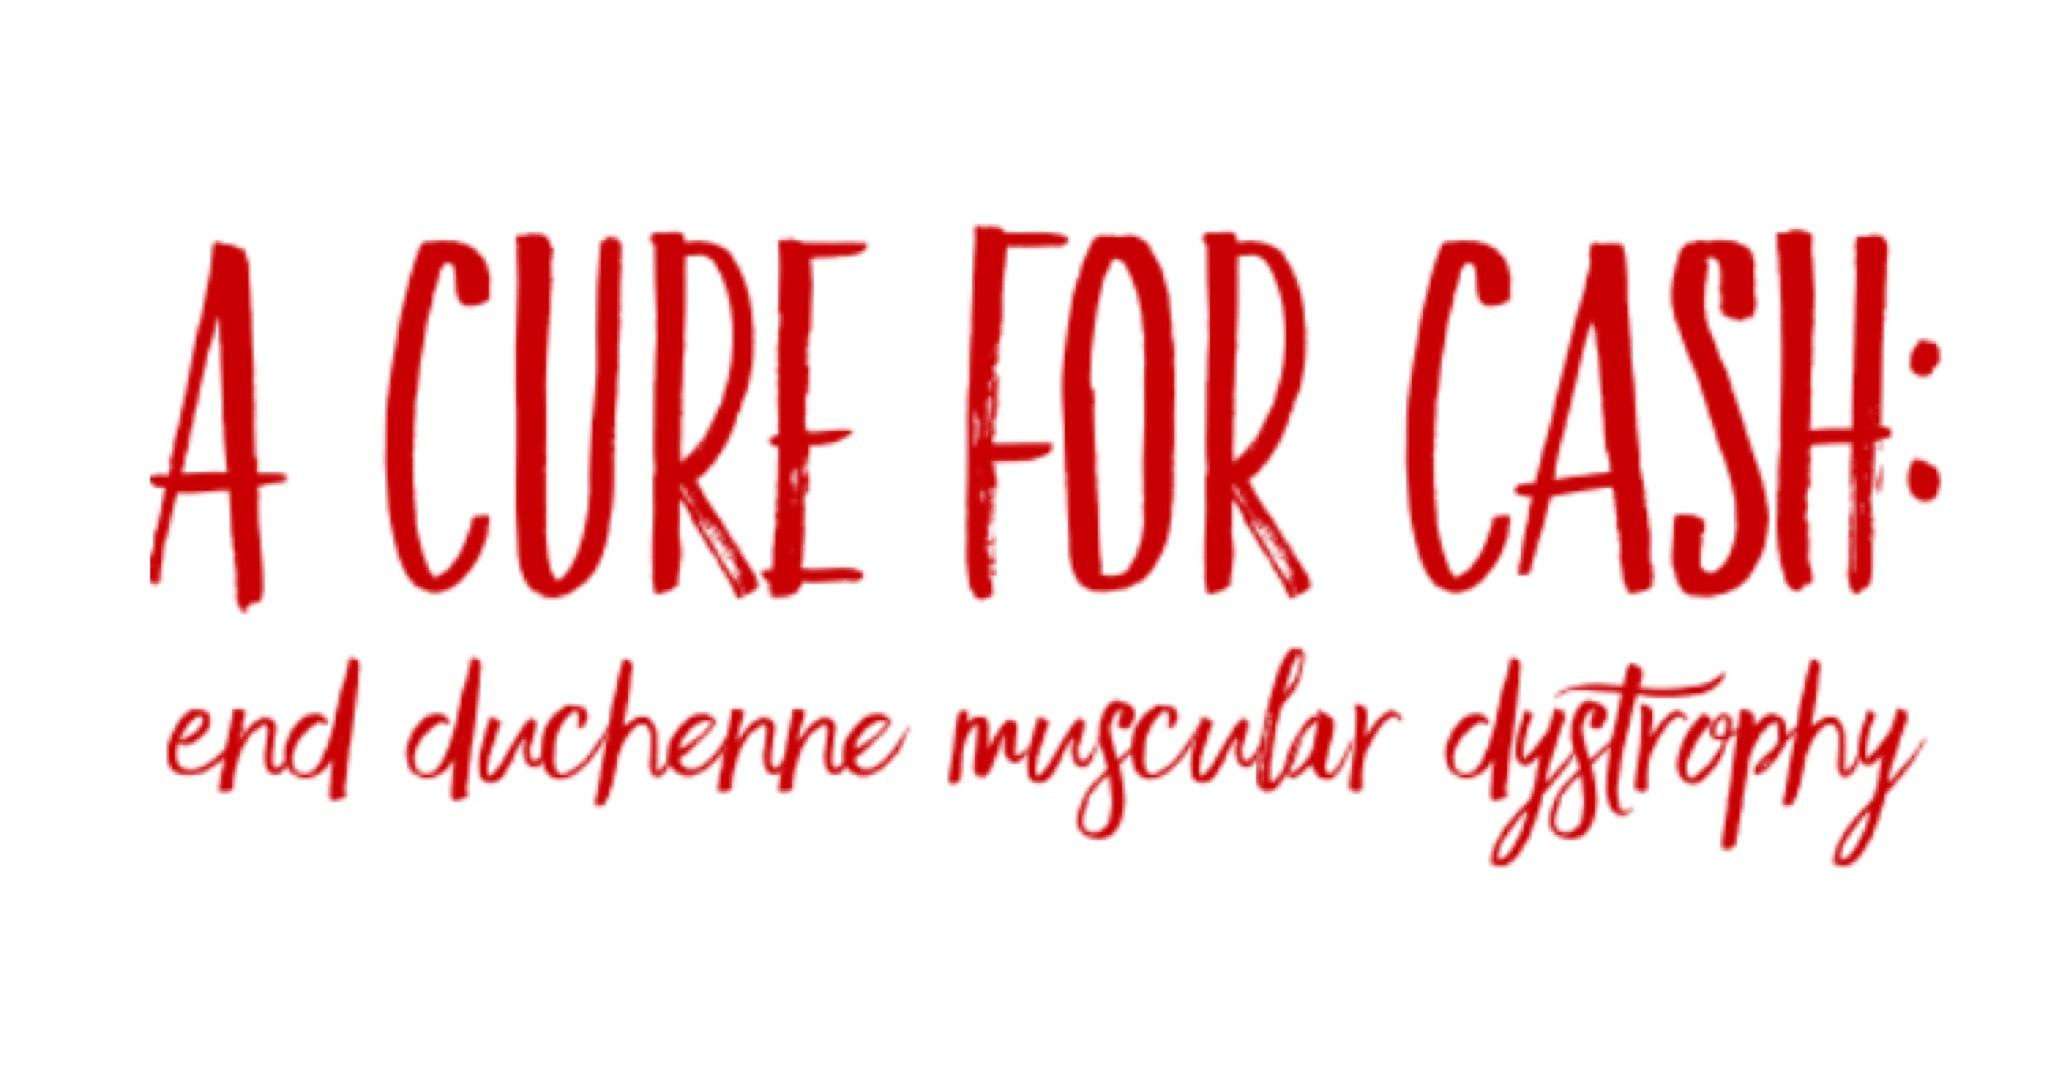 A Cure for Cash: End Duchenne Muscular Dystrophy